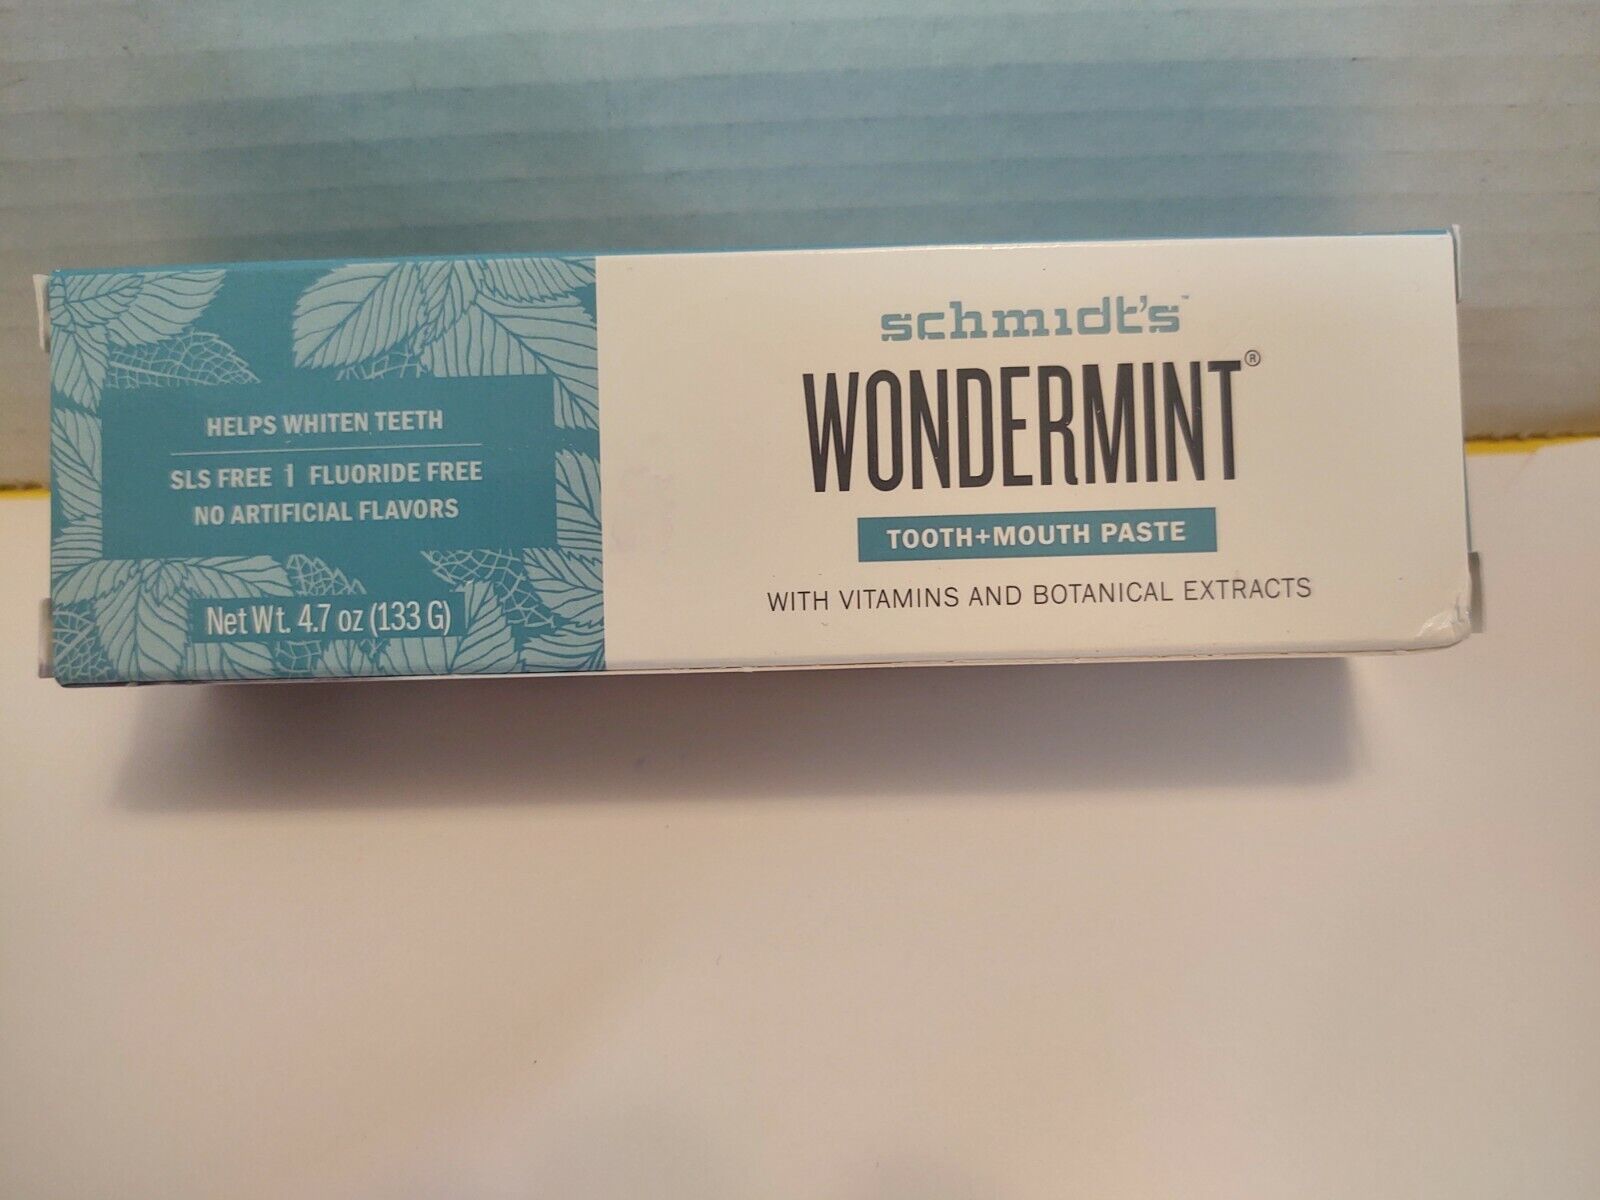 Schmidt's WONDERMINT Tooth Max 50% OFF + Mouth Paste TEETH Ea depot 4.7oz Vitamins WHITENS